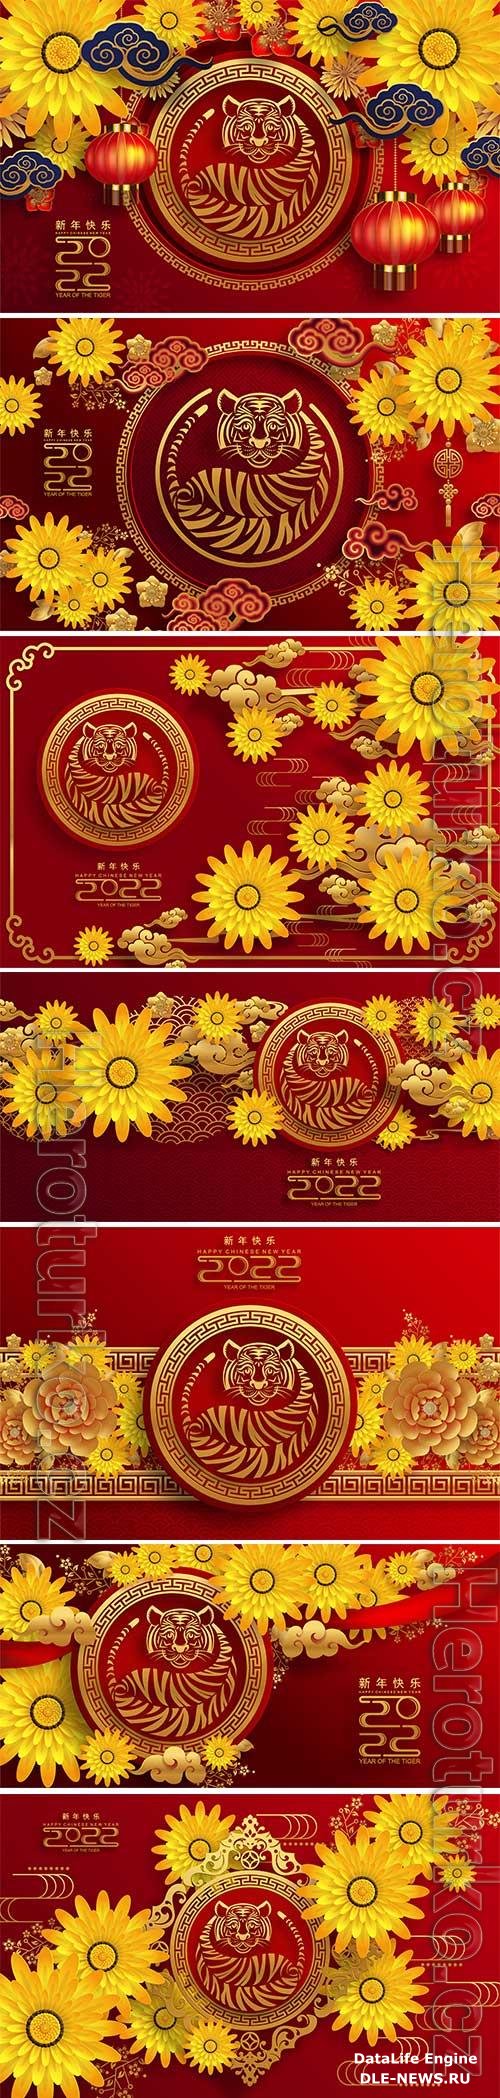 Chinese New Year, illustration with tiger, symbol of 2022, vector texts vol 3